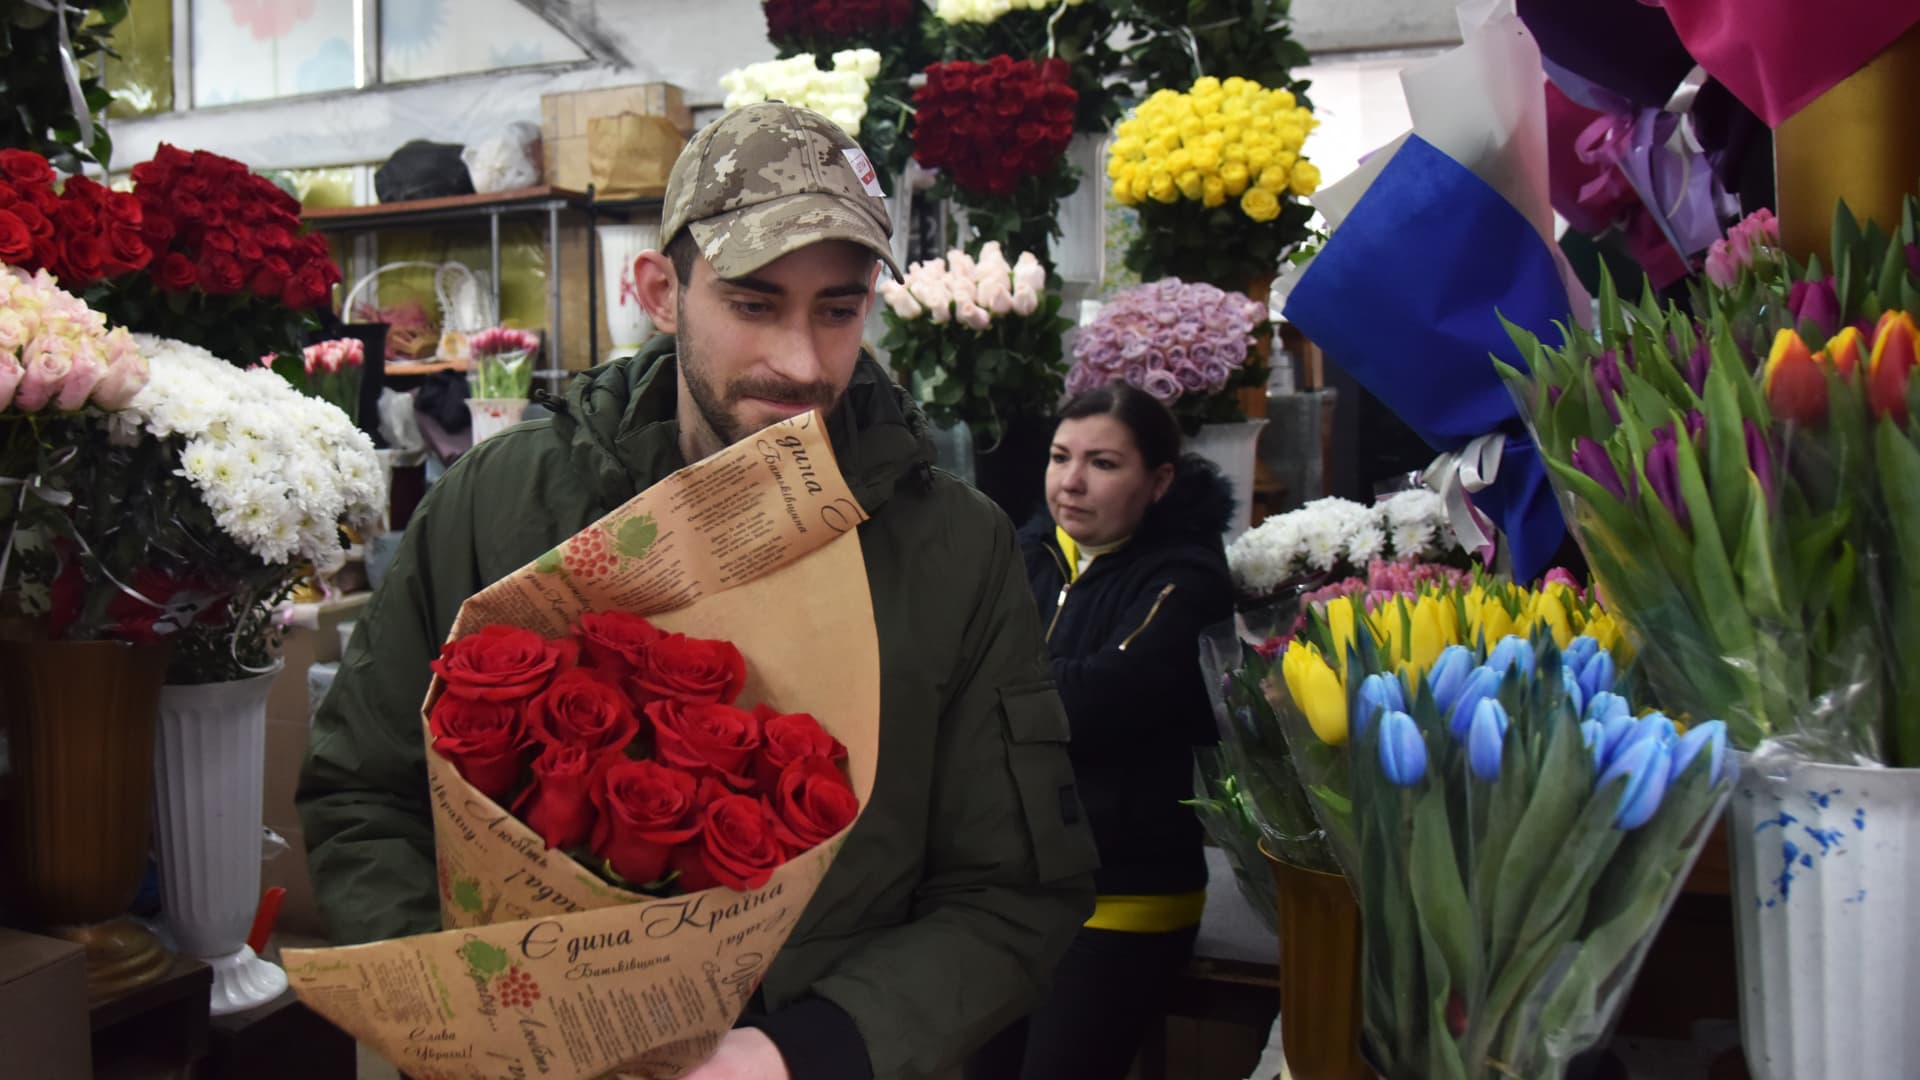 A man buys flowers at a flower market on Valentine's Day during the Russo-Ukrainian war in Lviv, Ukraine on February 14, 2023.